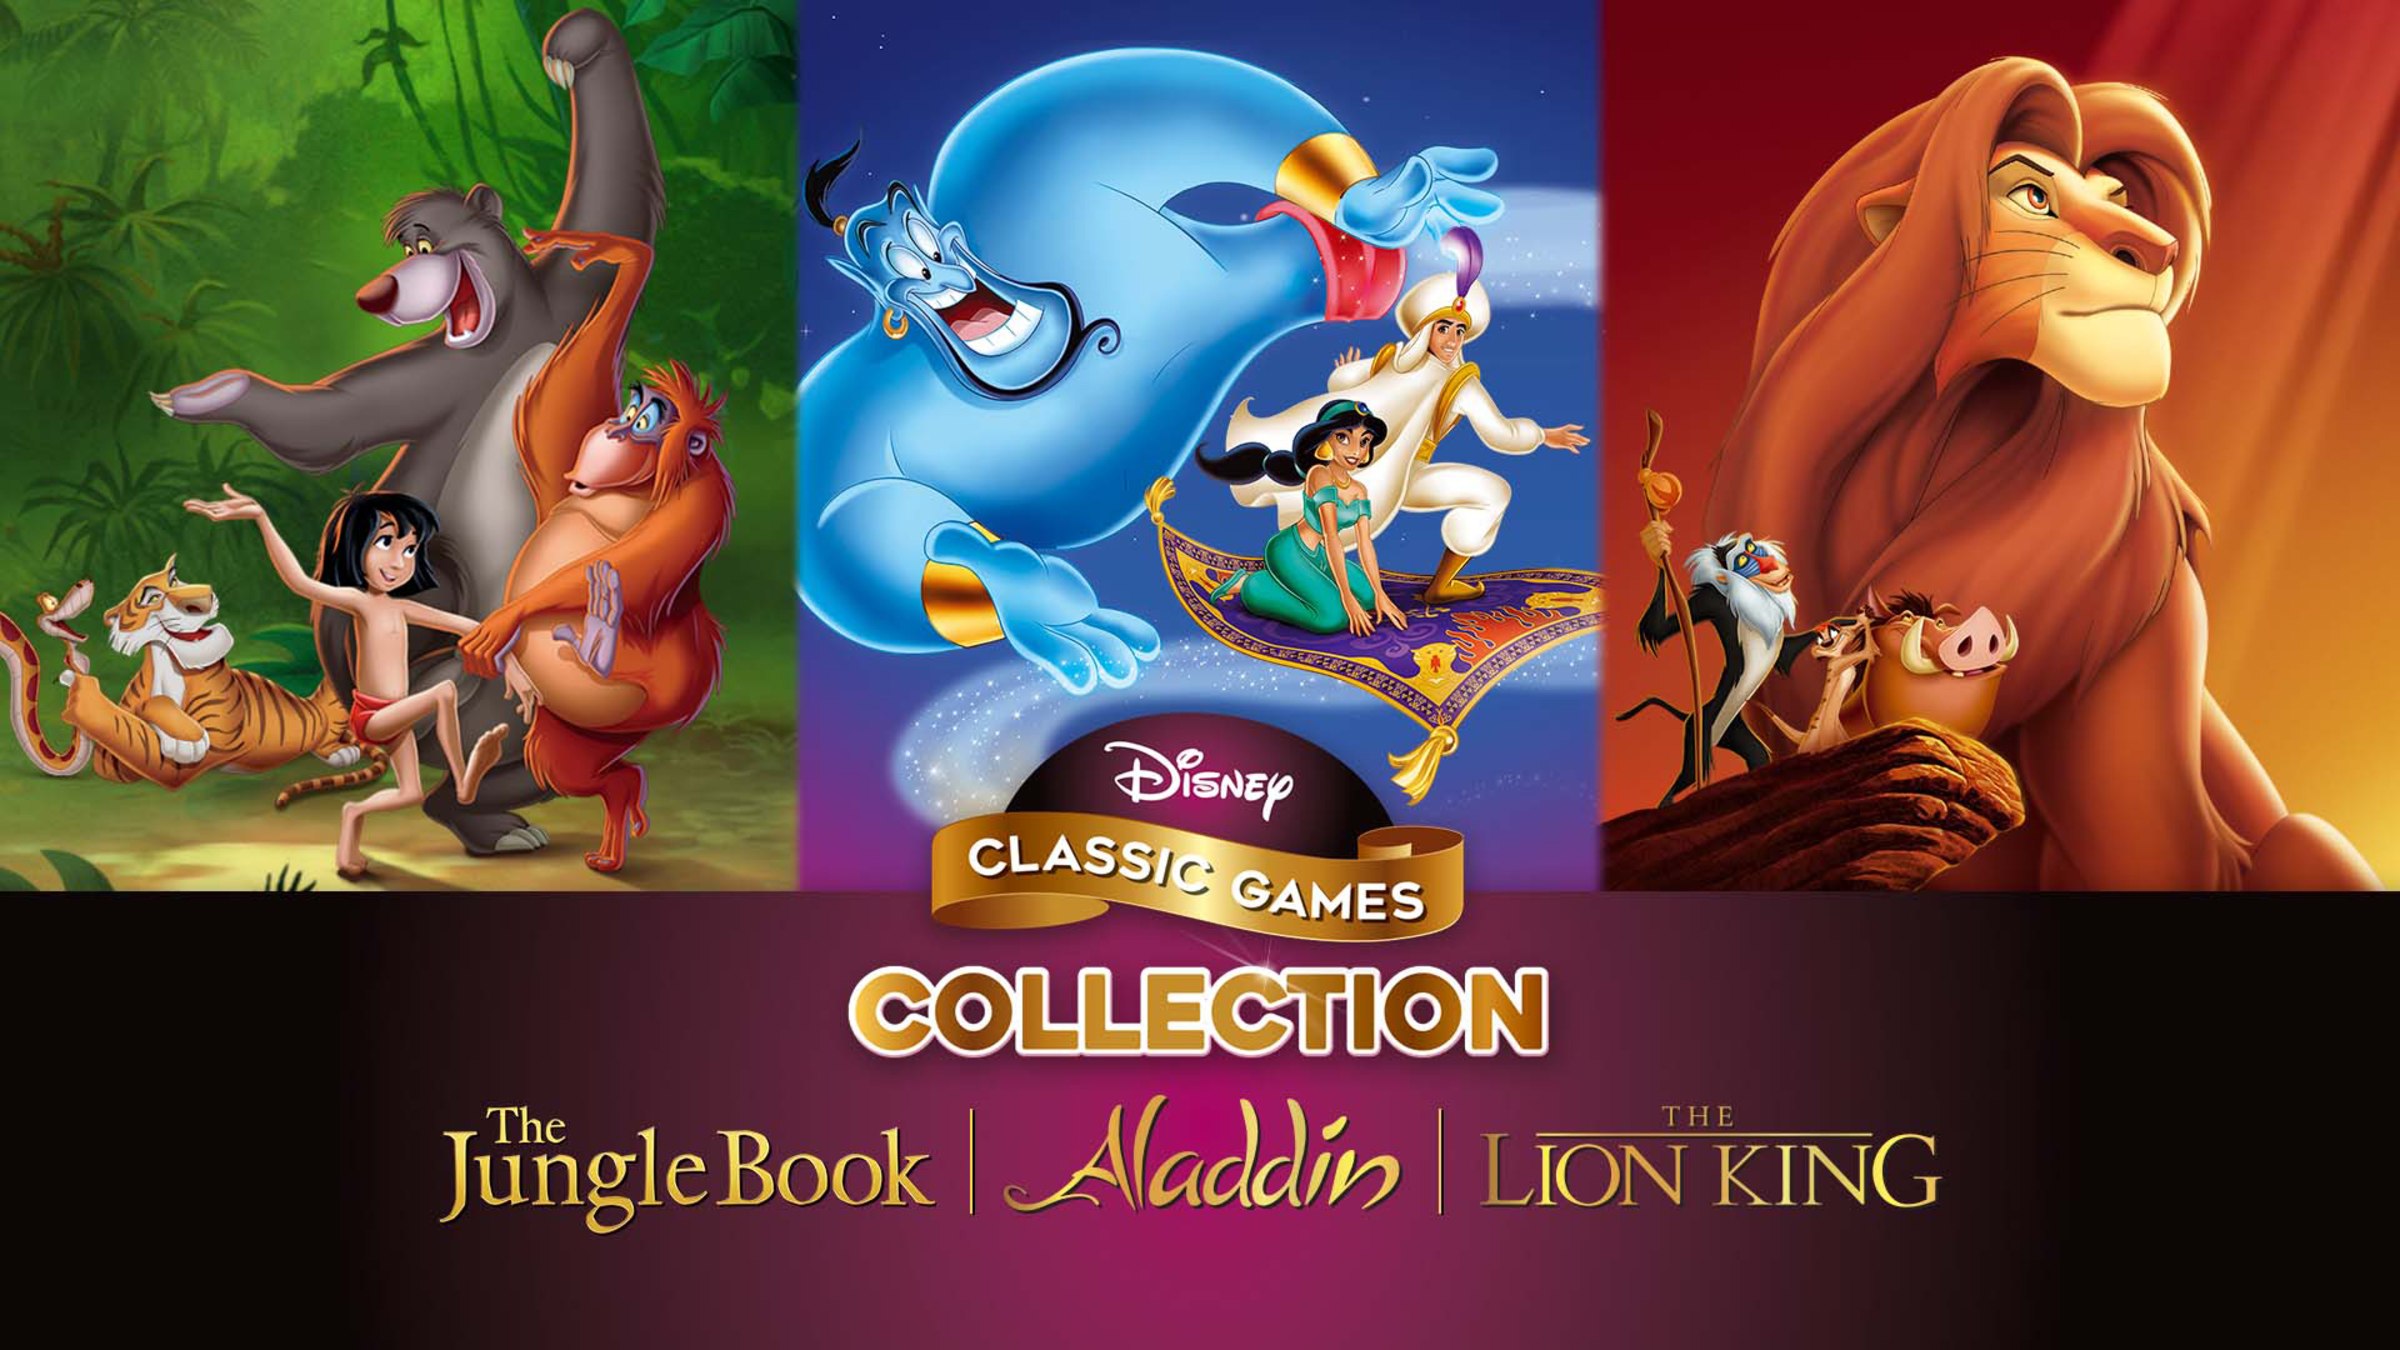 Betydelig Tolk Taknemmelig Disney Classic Games Collection for Nintendo Switch - Nintendo Official Site